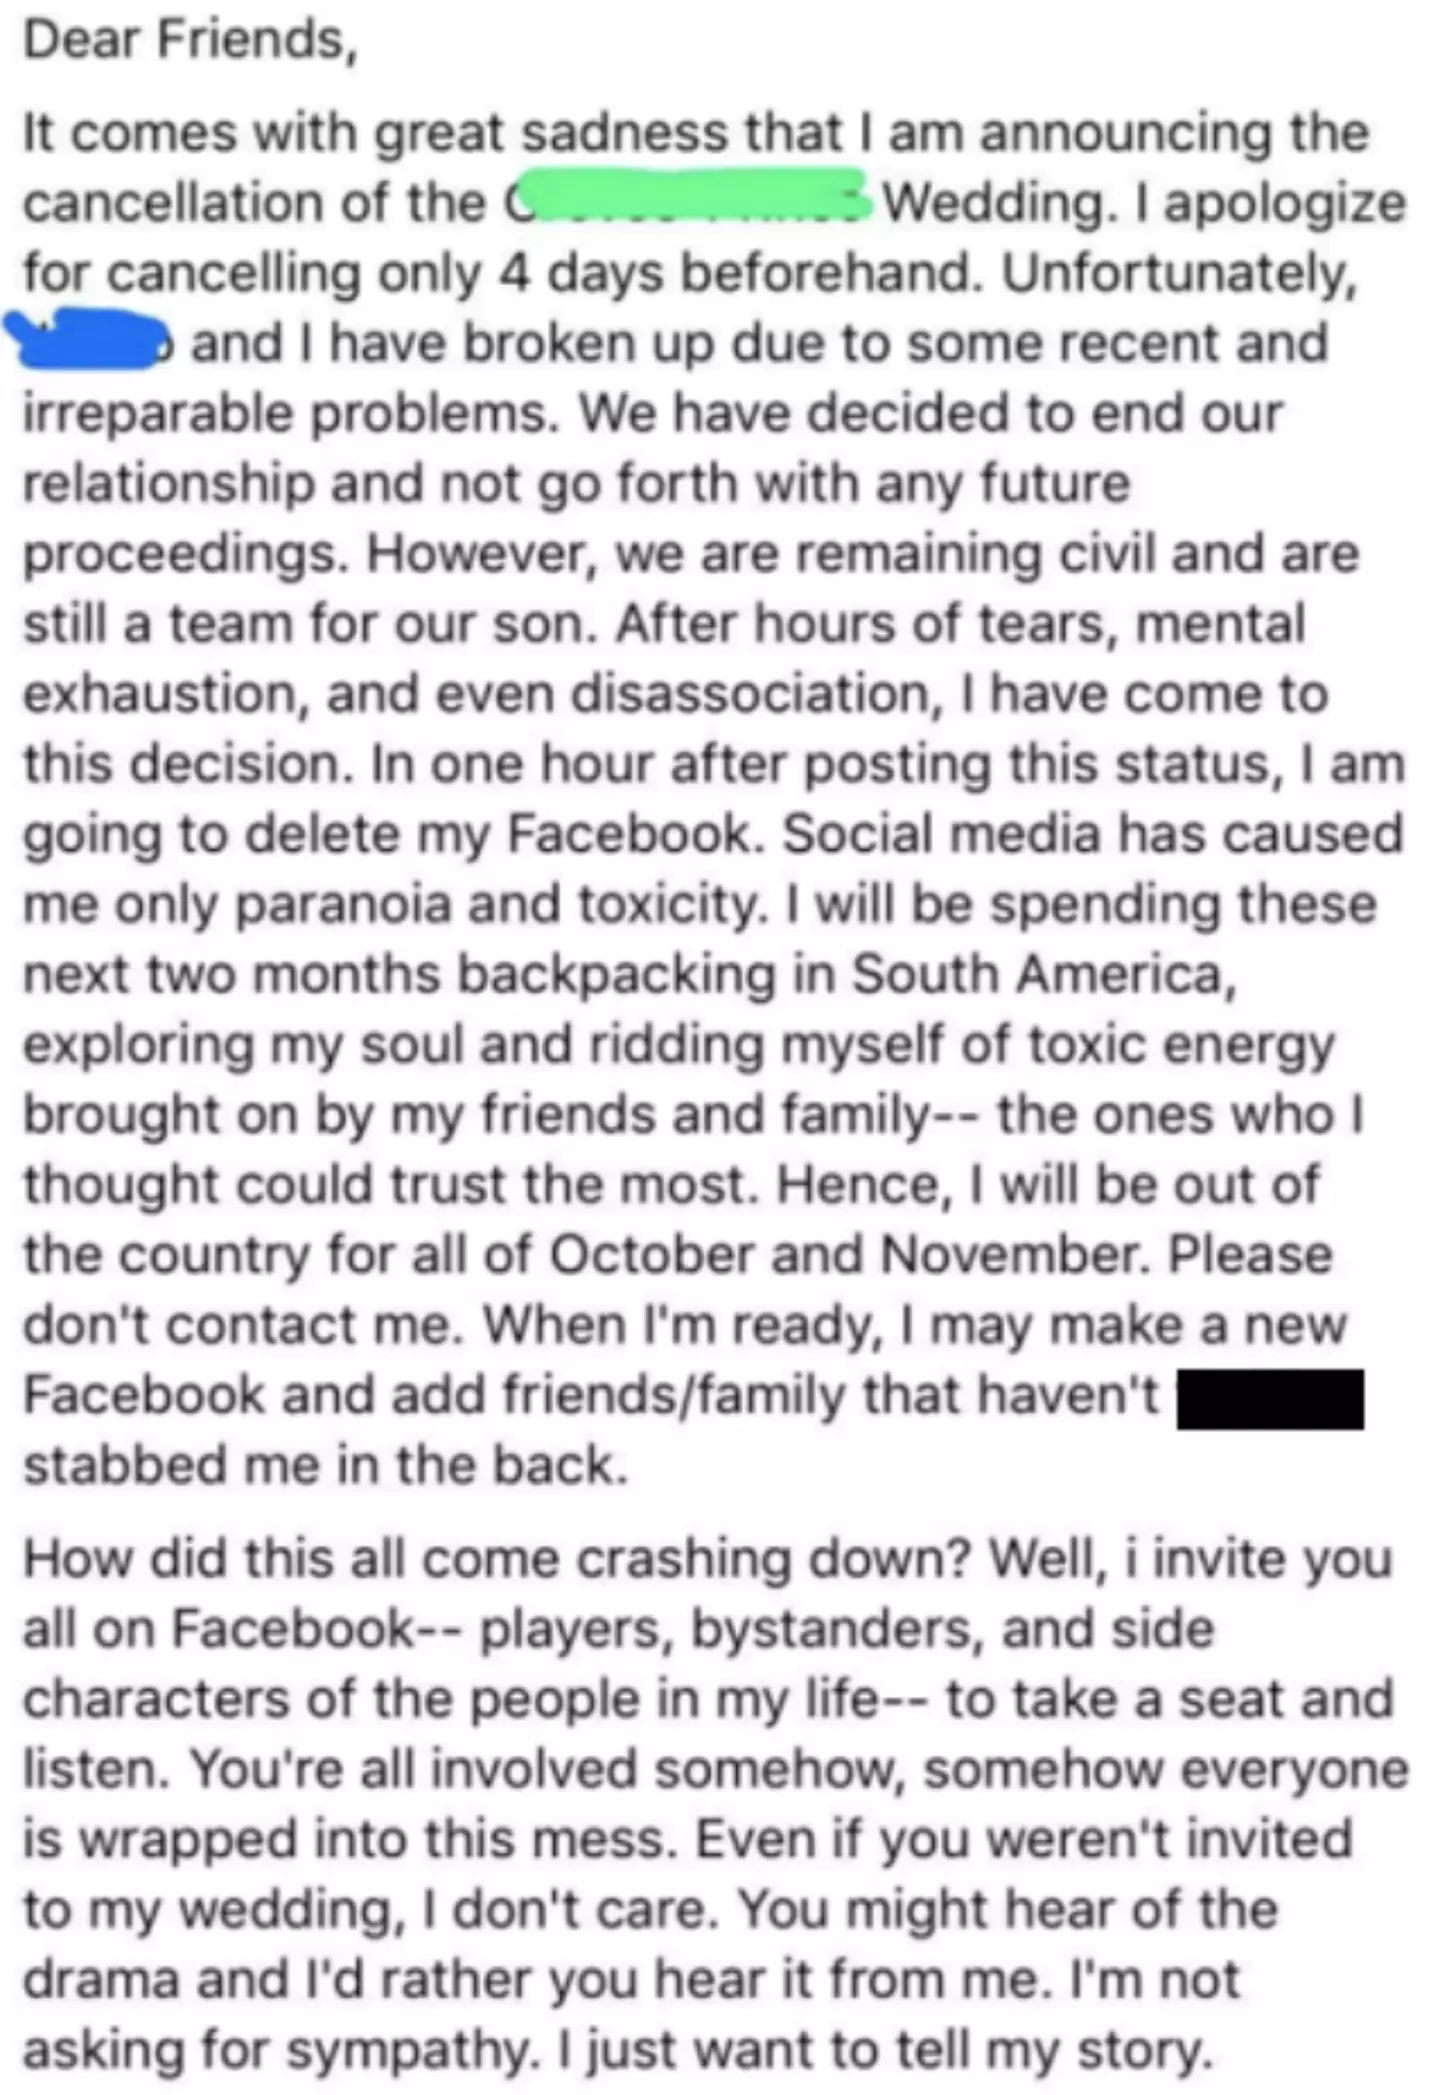 The woman shared her story on Facebook (